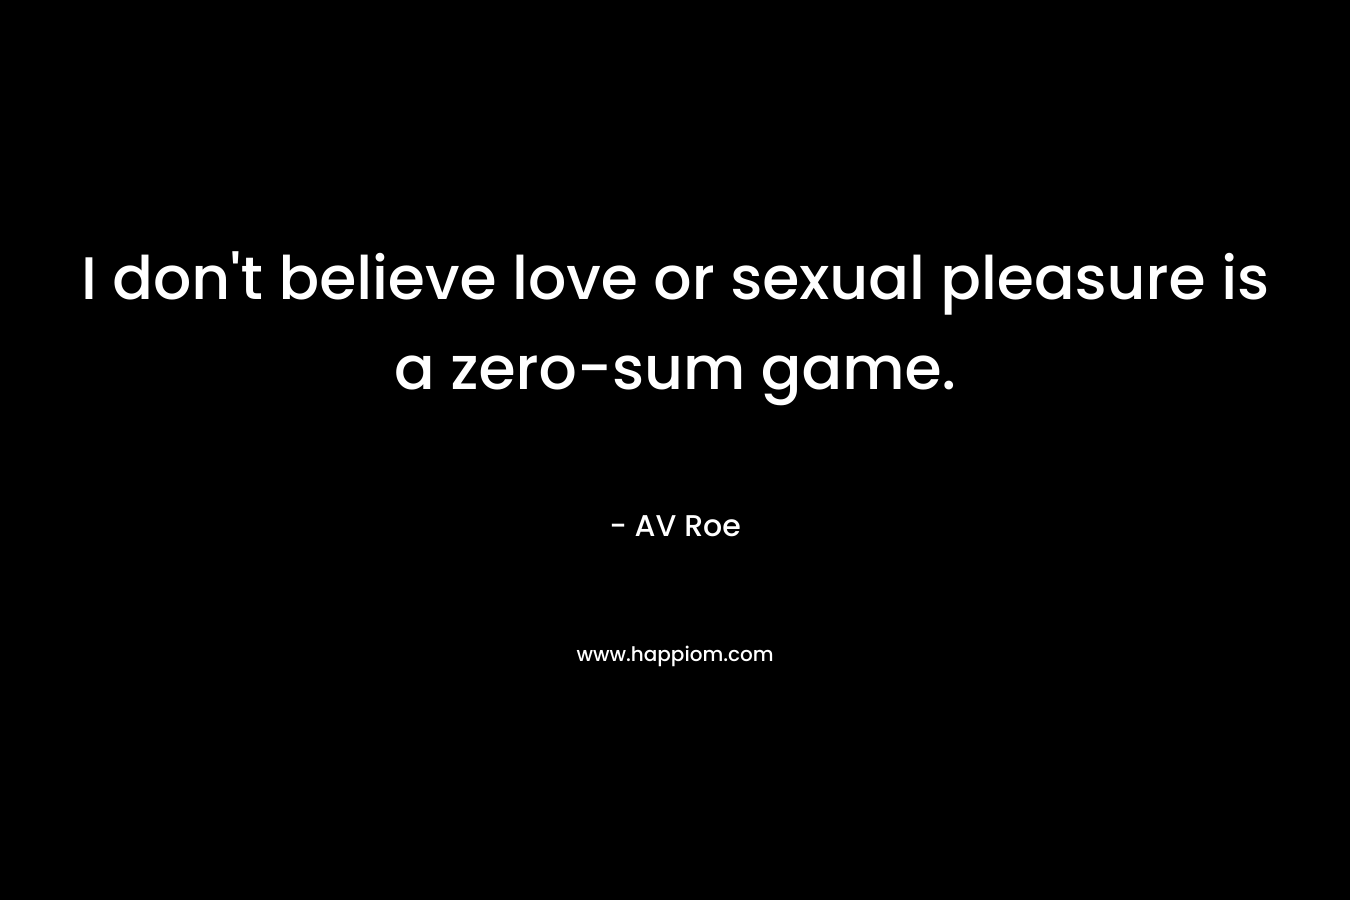 I don't believe love or sexual pleasure is a zero-sum game.